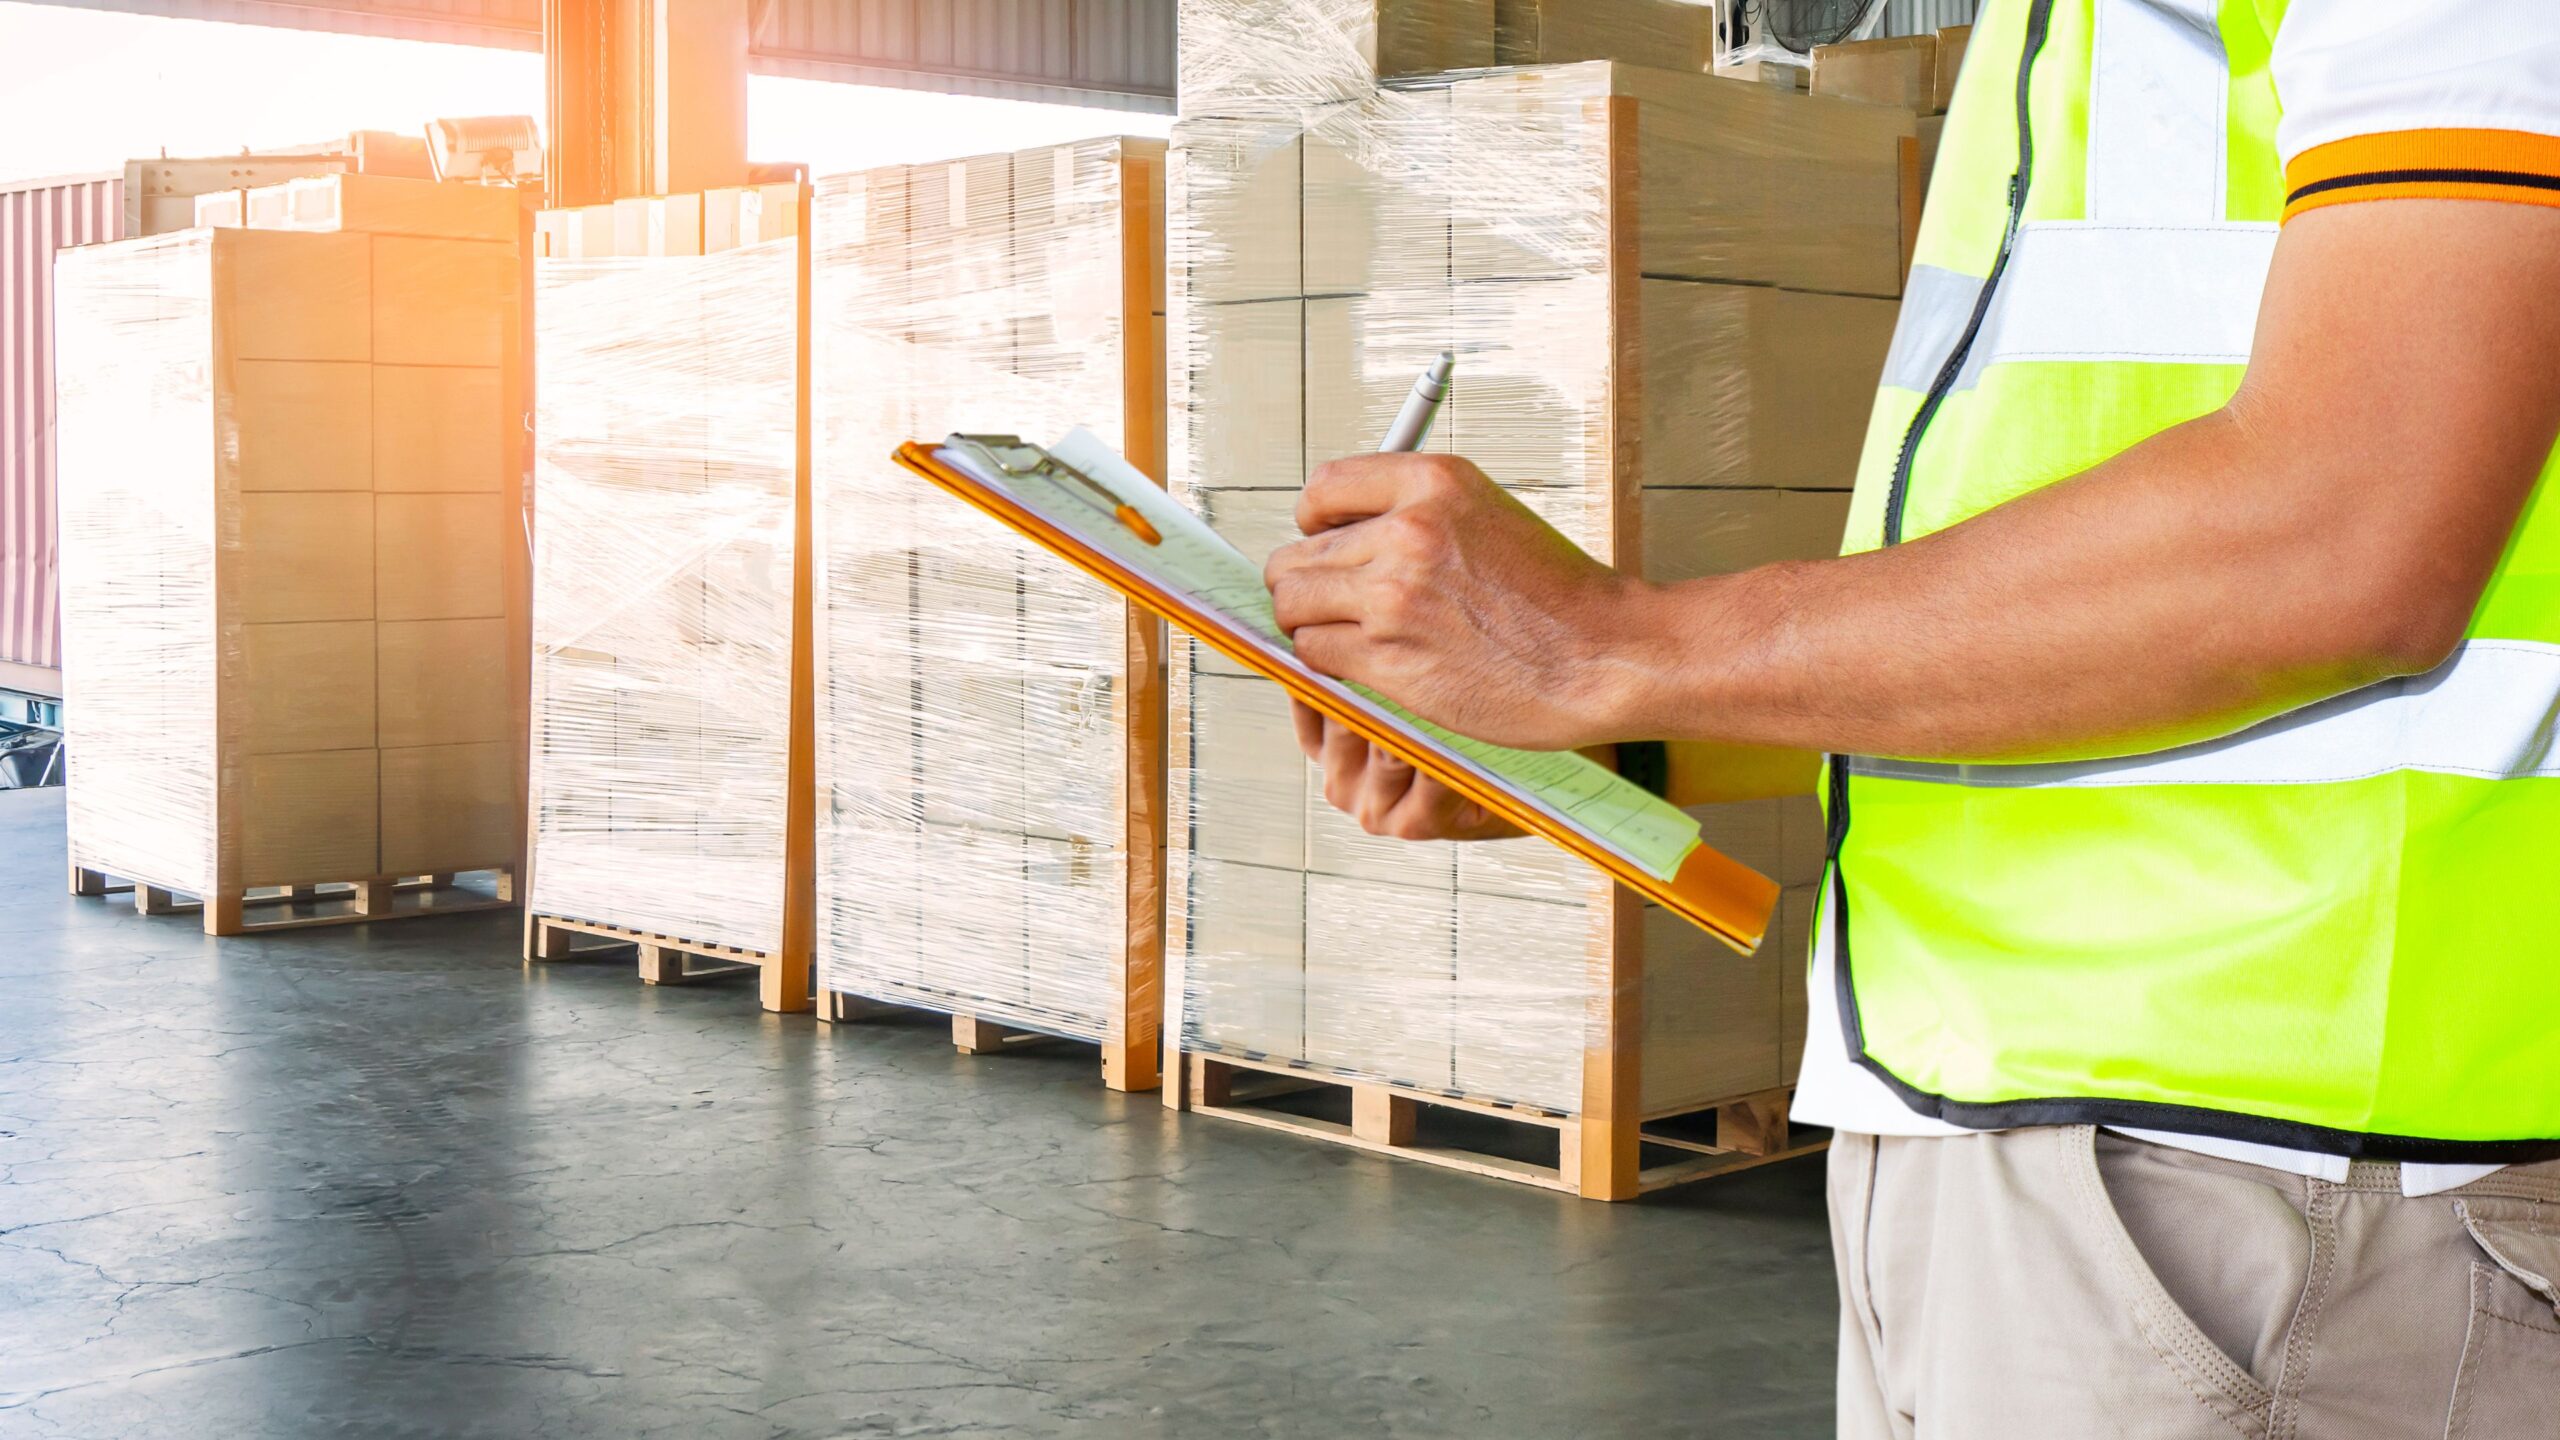 The problems with inefficient picking in a warehouse & how to overcome them